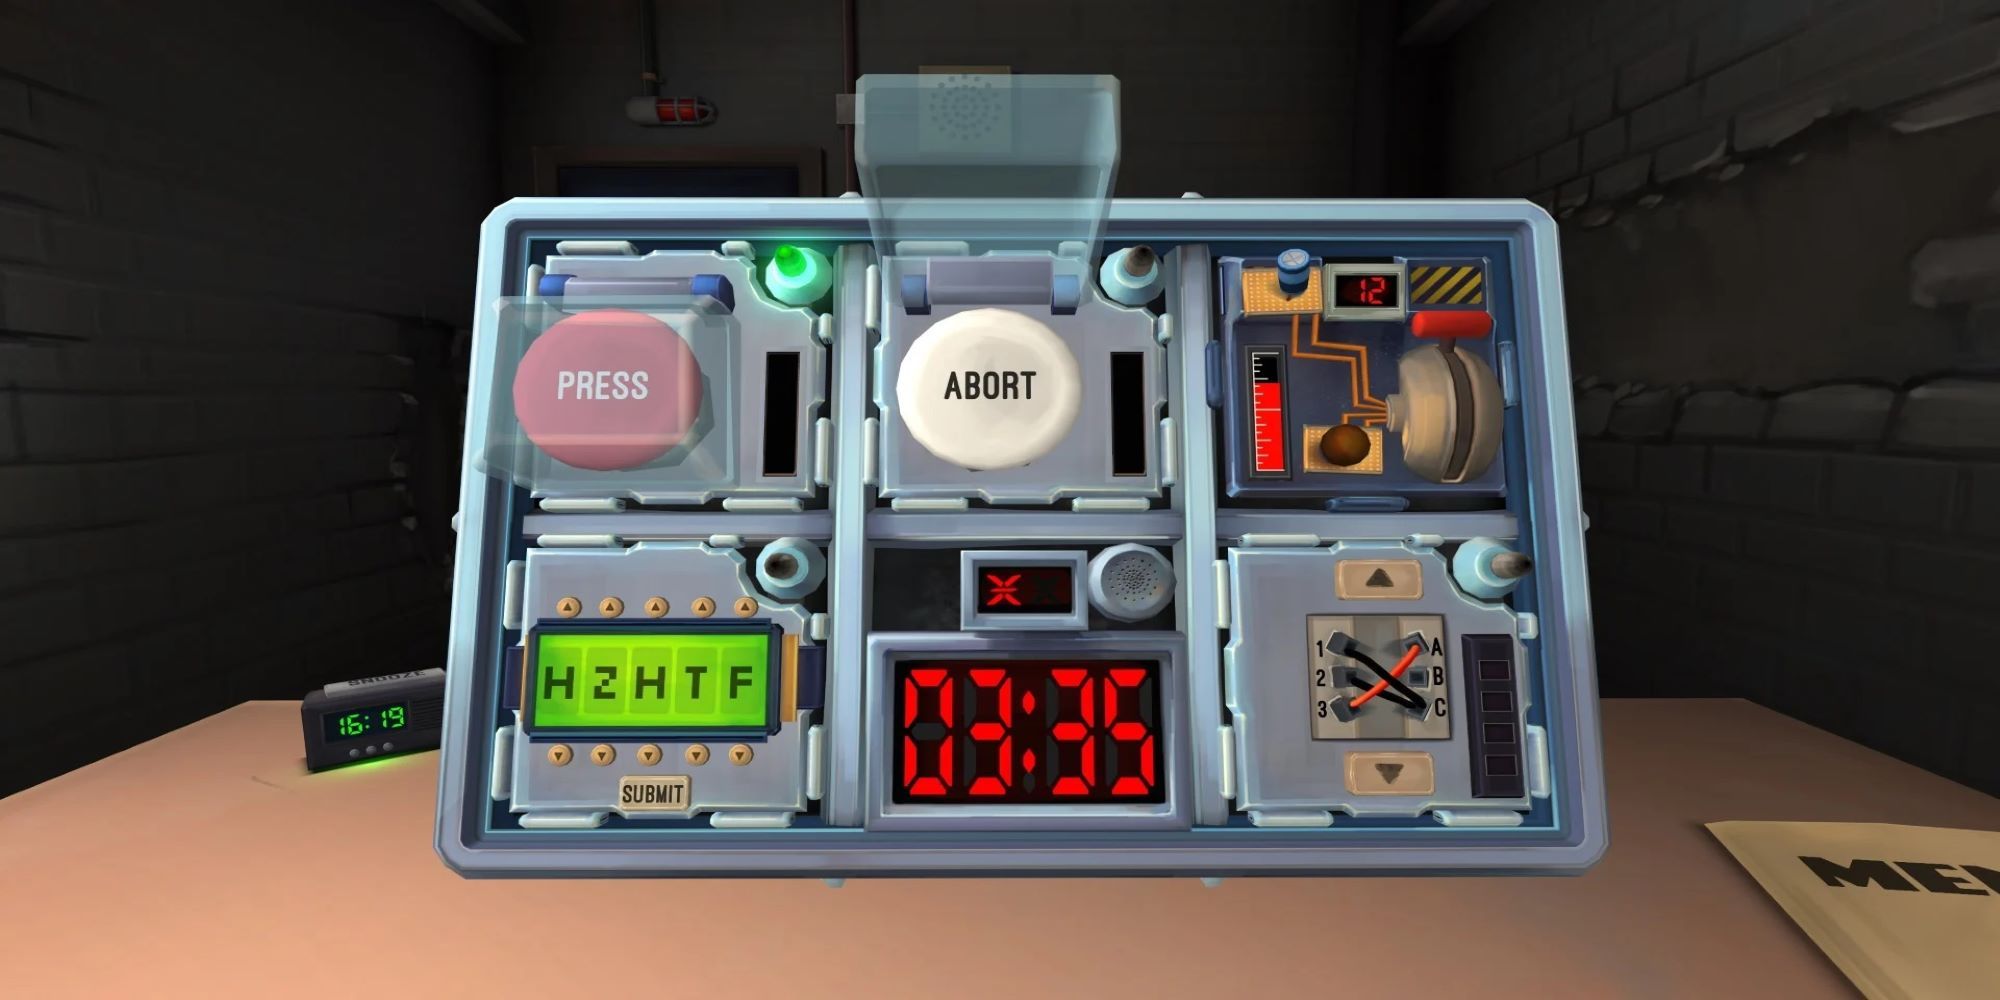 There are three minutes and thirty-five seconds left to disable a complicated bomb in Keep Talking And Nobody Explodes.